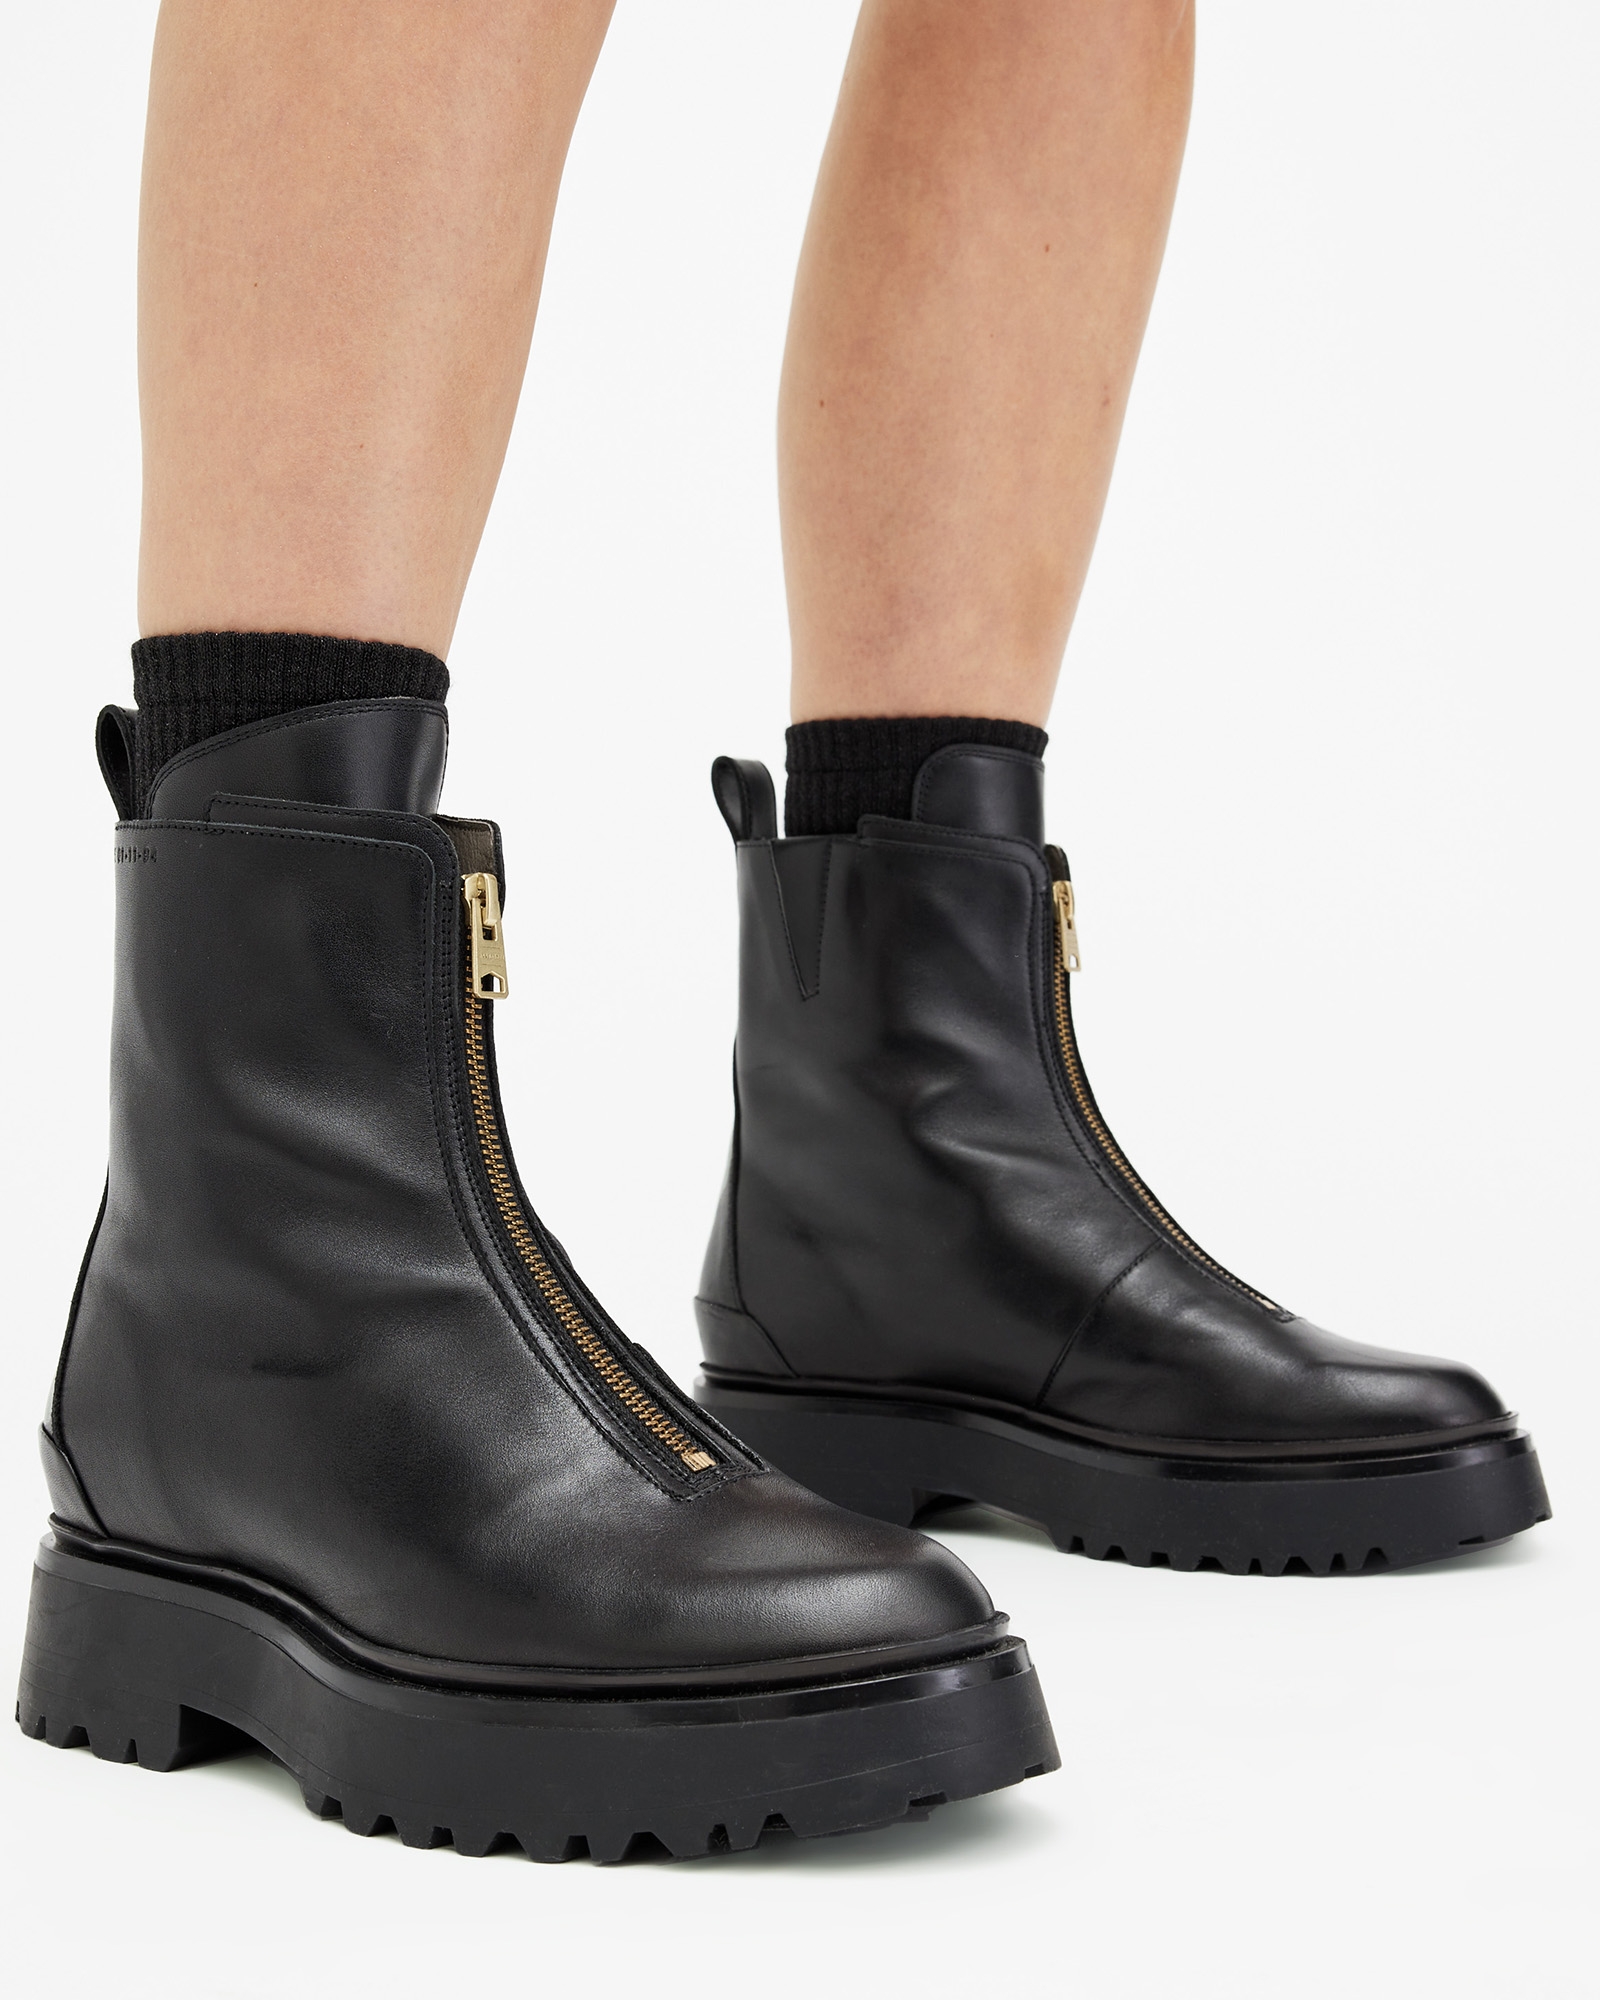 AllSaints Ophelia Chunky Leather Chelsea Boots,, Black